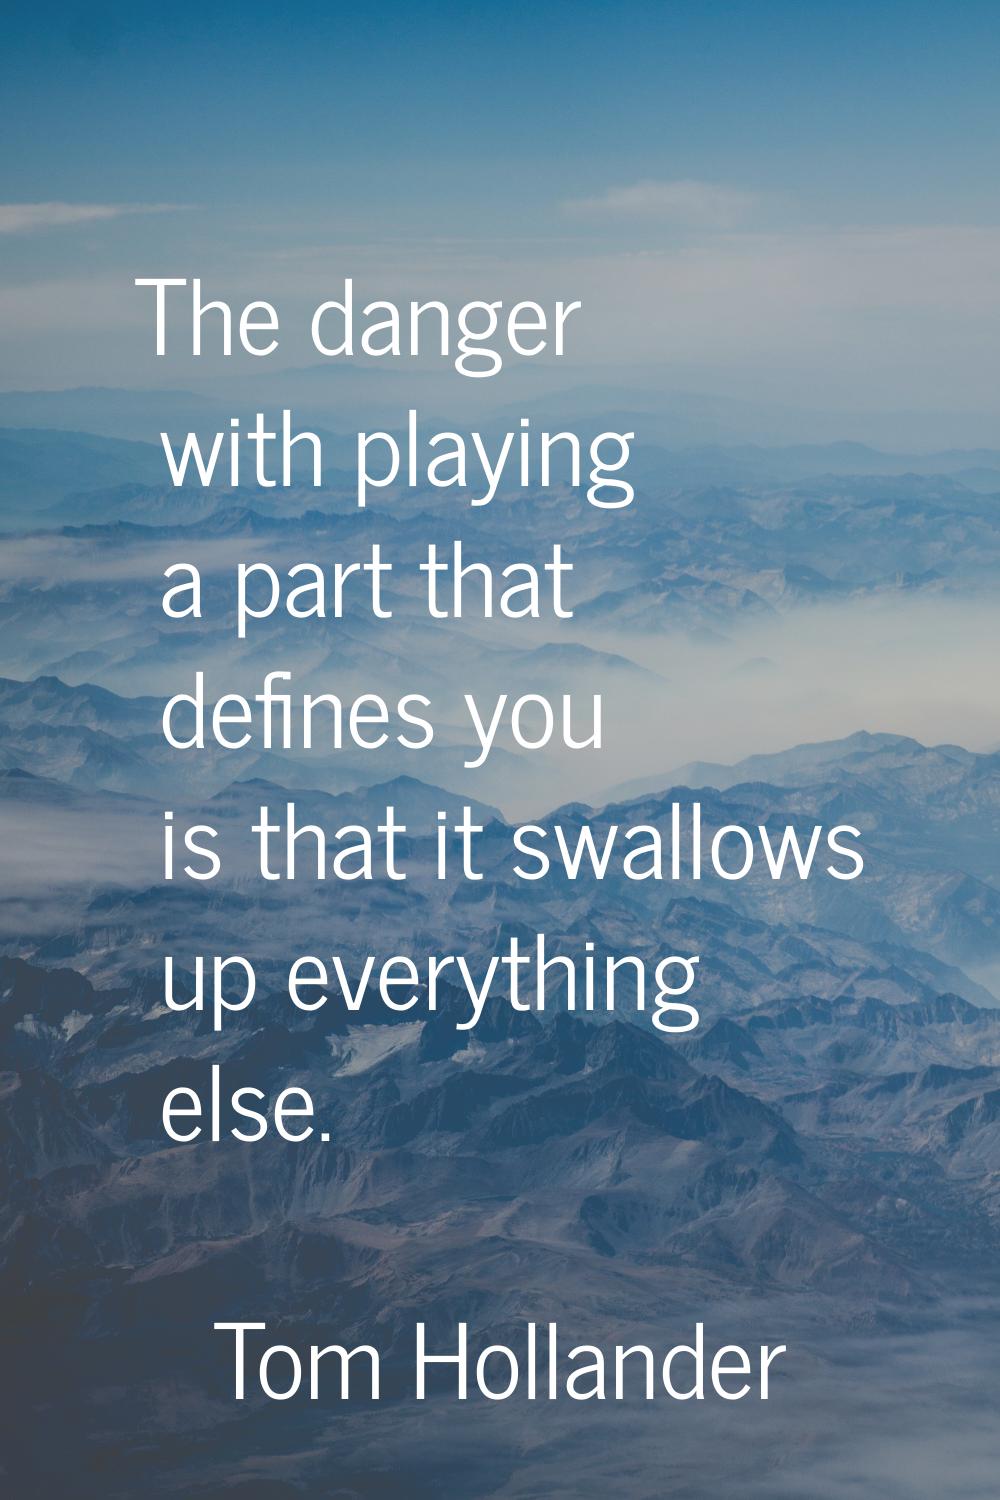 The danger with playing a part that defines you is that it swallows up everything else.